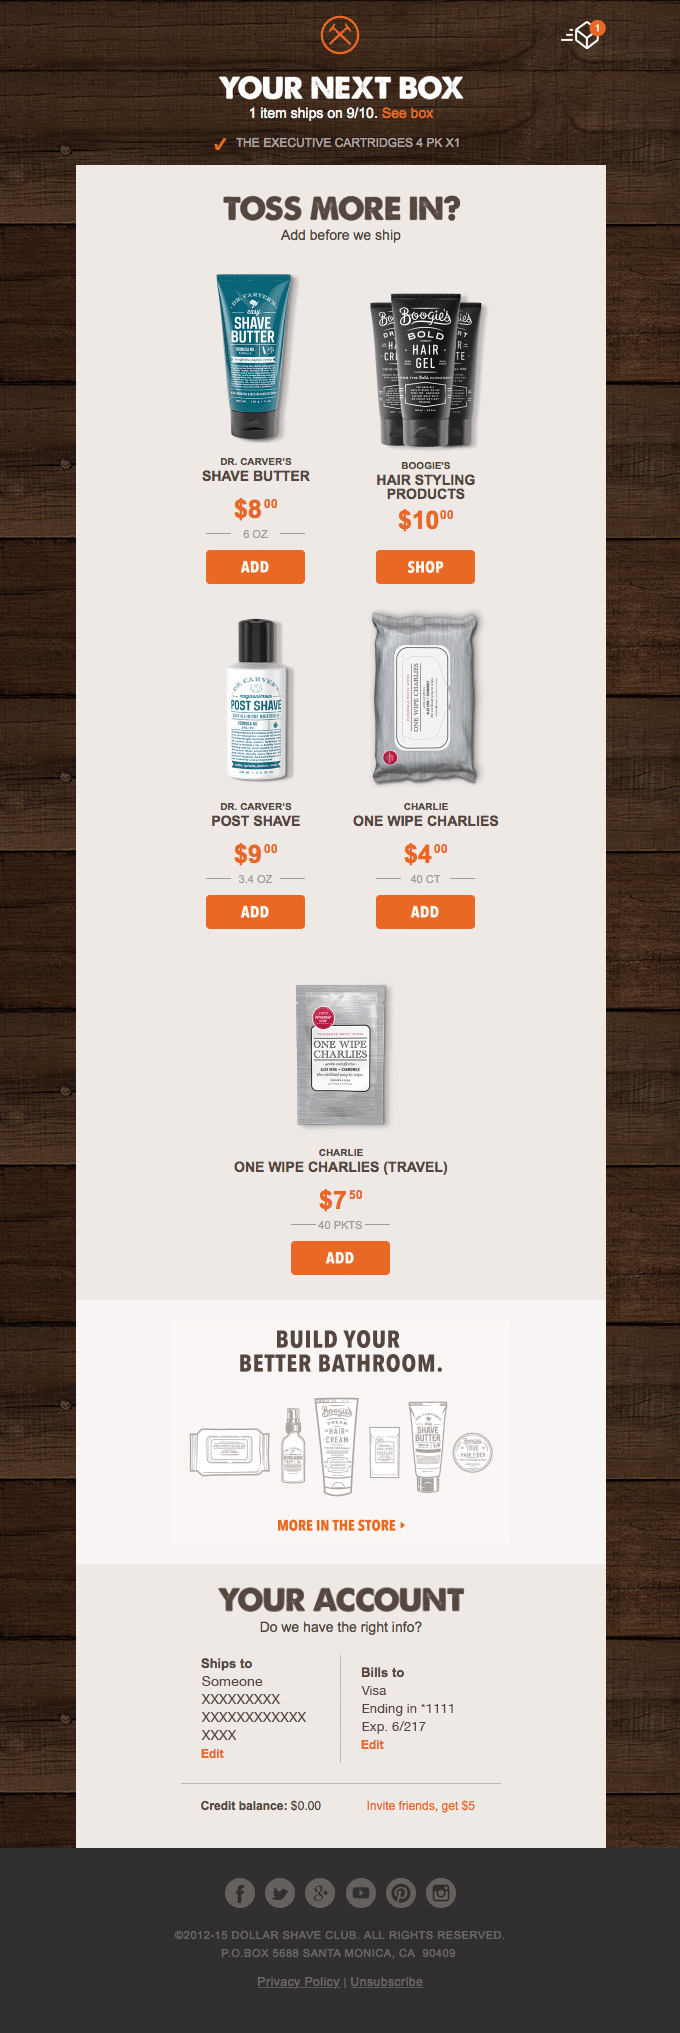  Dollar Shave Club email showing an example of cross-selling